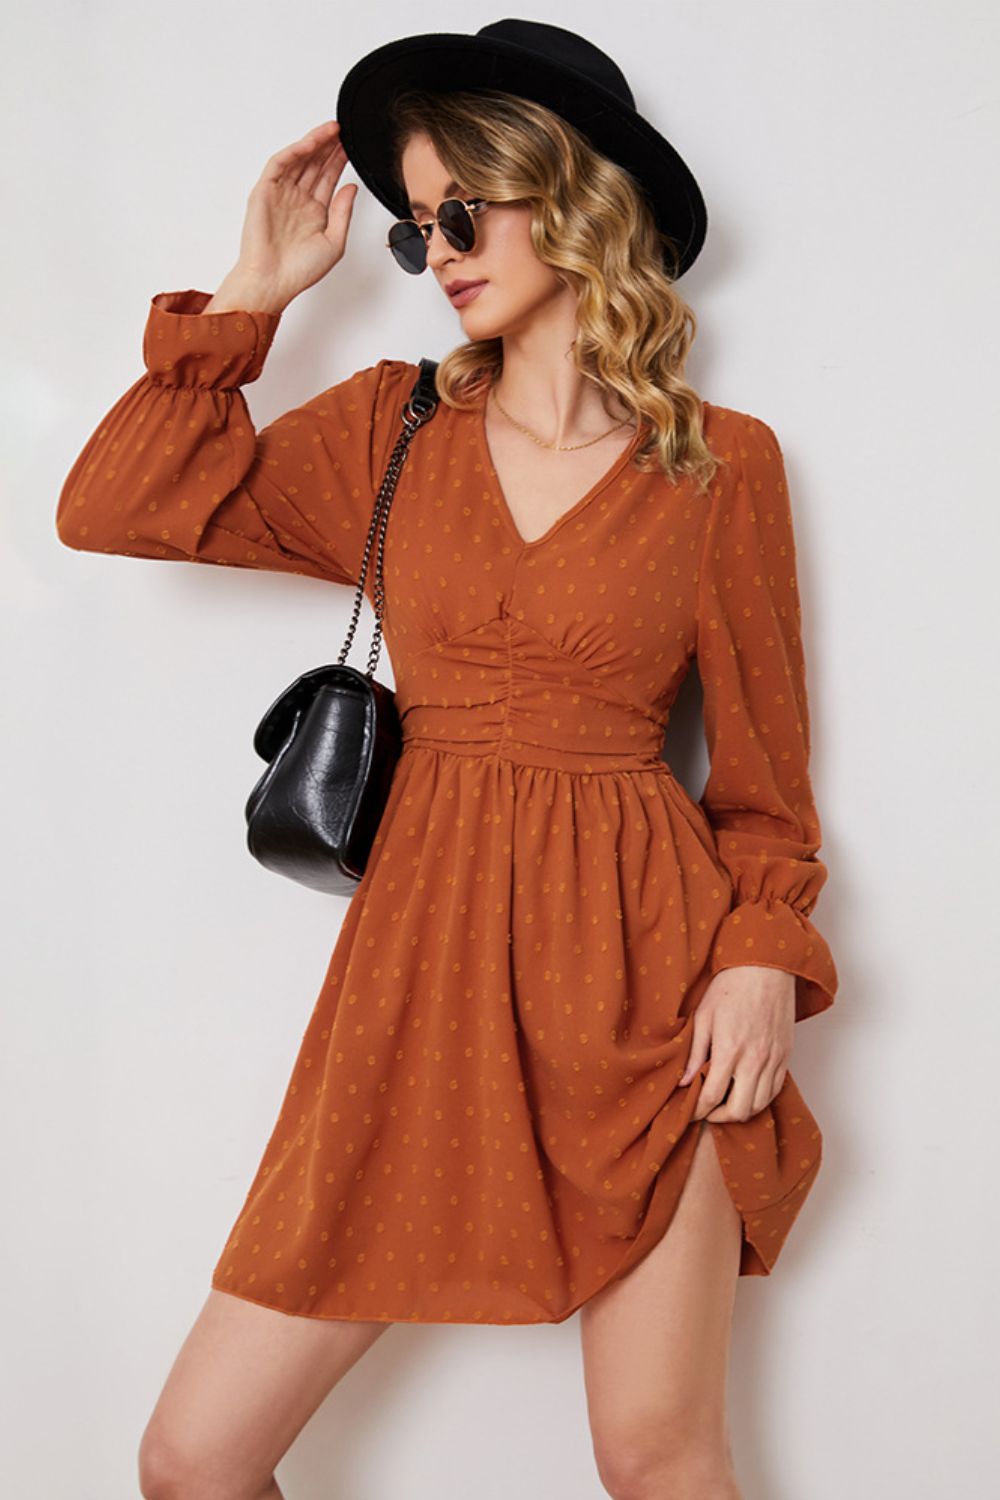 Enchanted Whimsy's Swiss Dot Ruched V-Neck Flounce Sleeve Dress - Transport Yourself to a World of Pure Romance and Grace - Embrace Your Inner Goddess - Guy Christopher